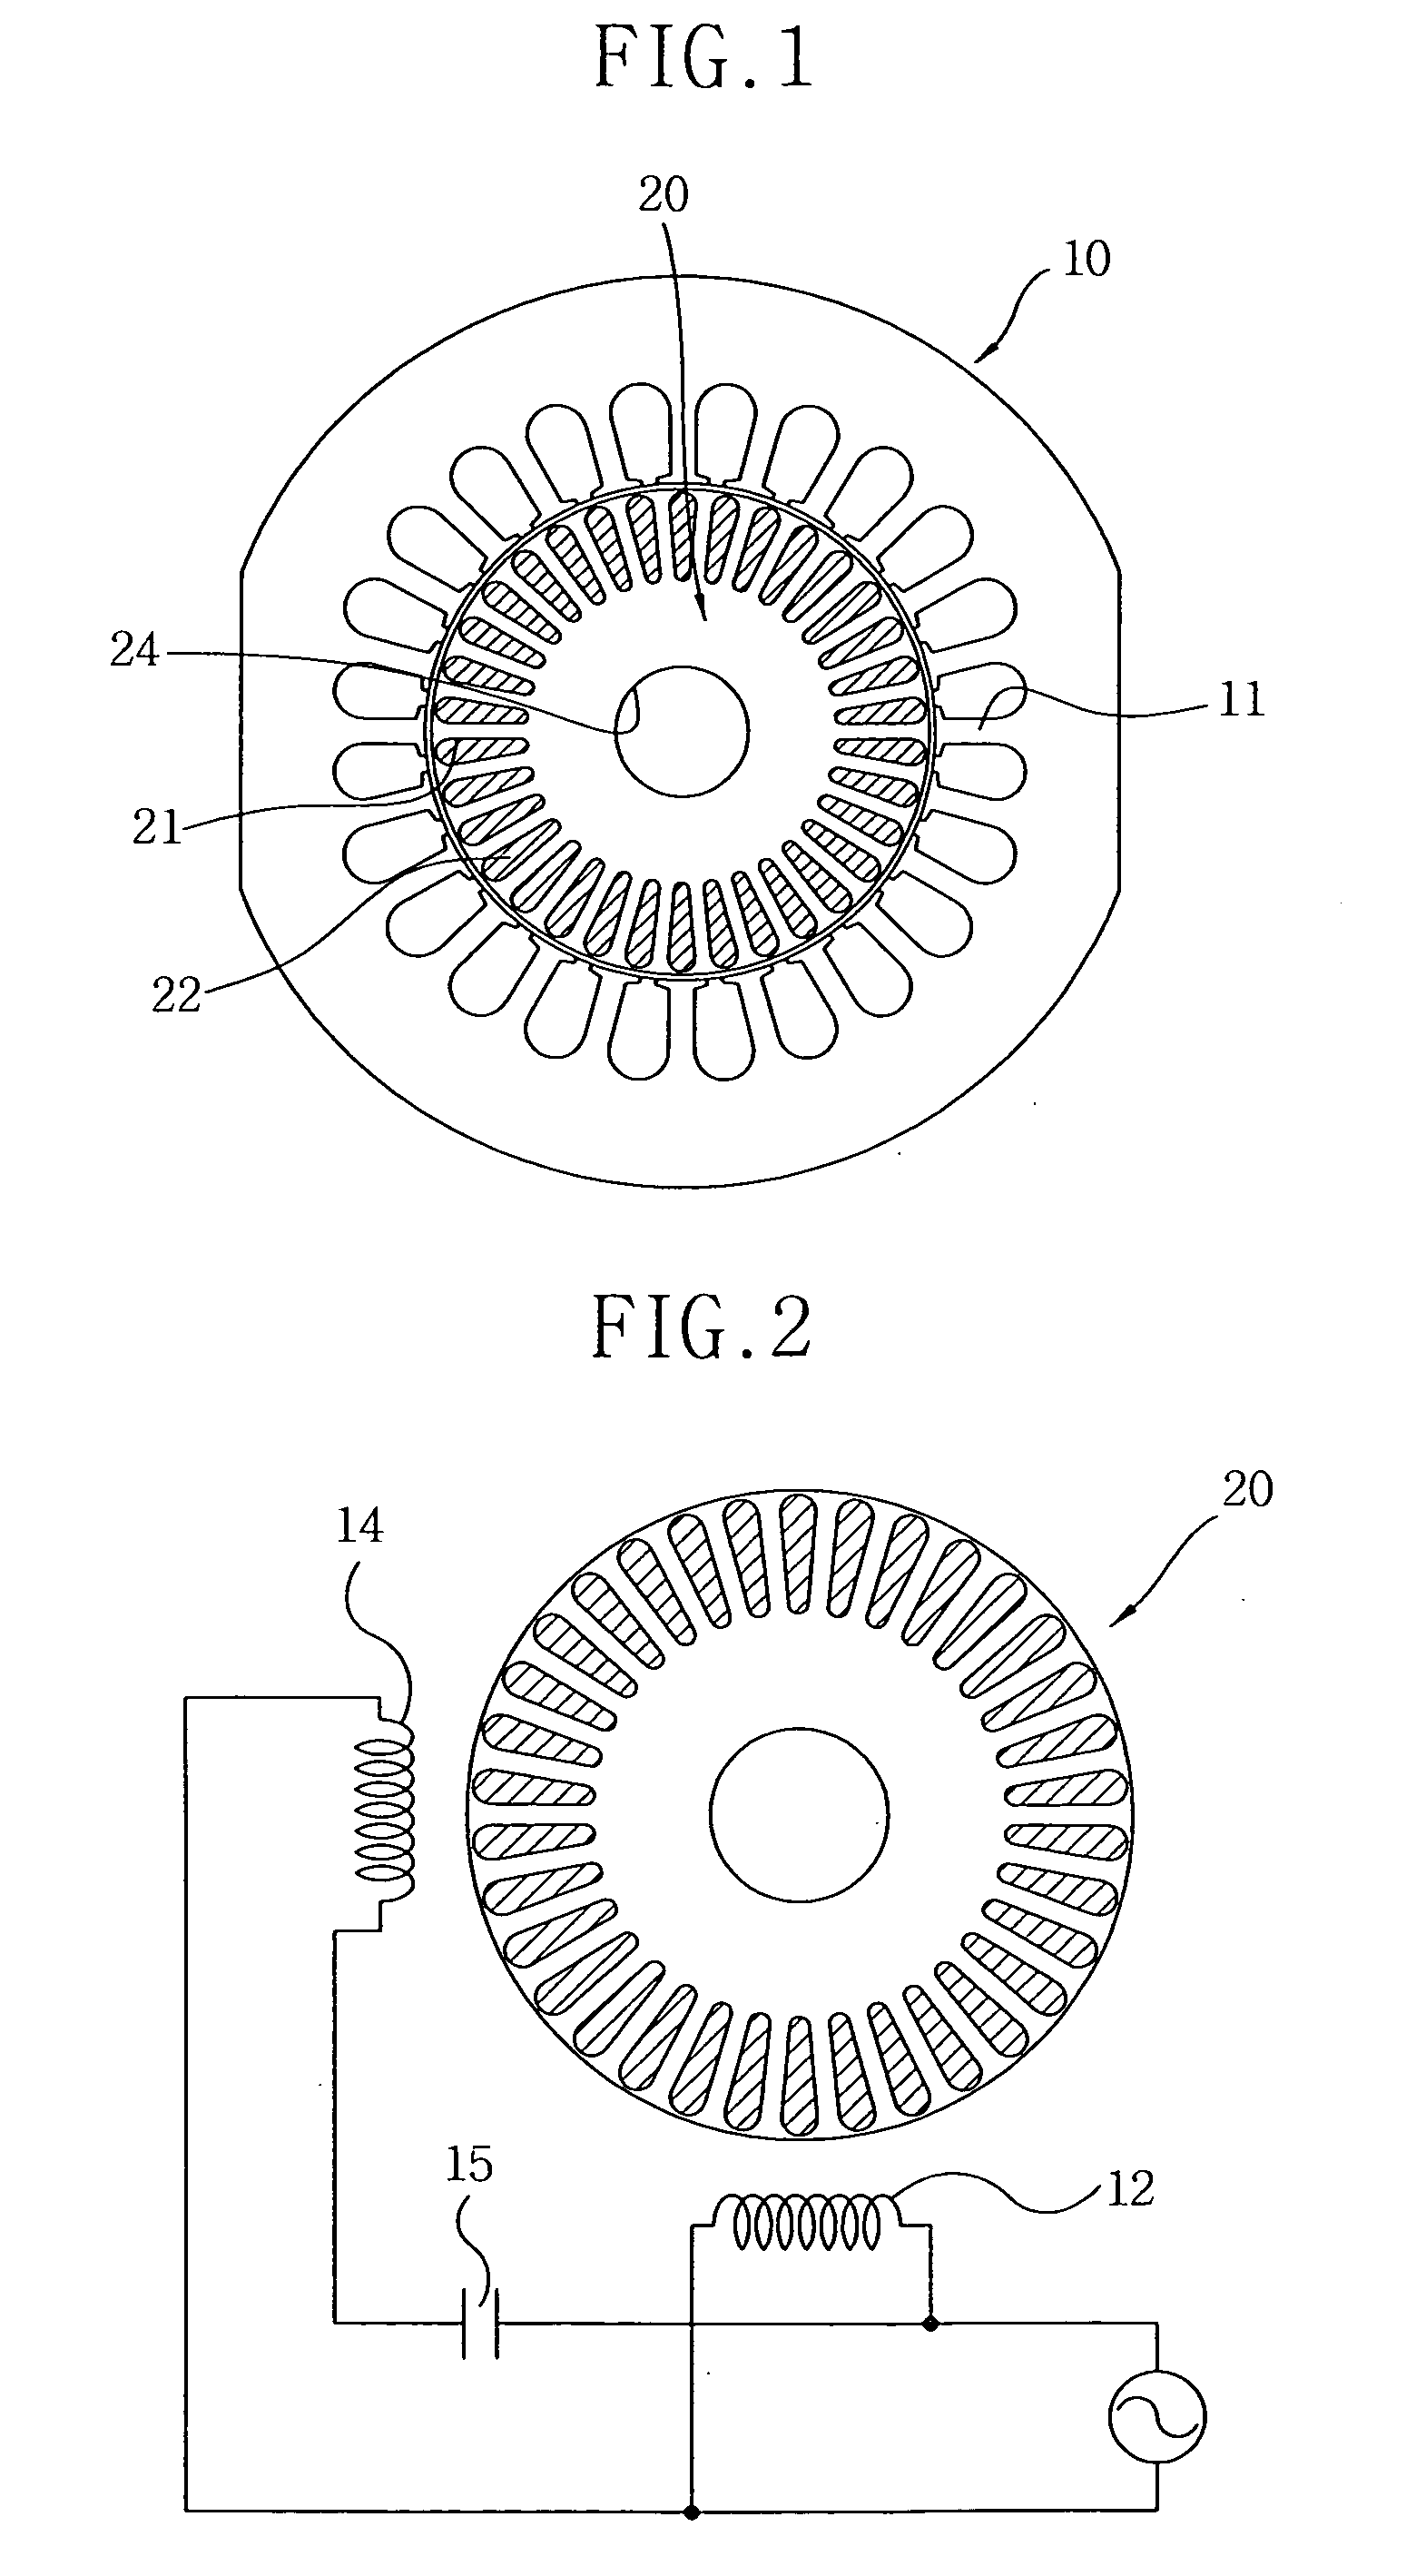 Motor, compressor and air conditioning system having the same